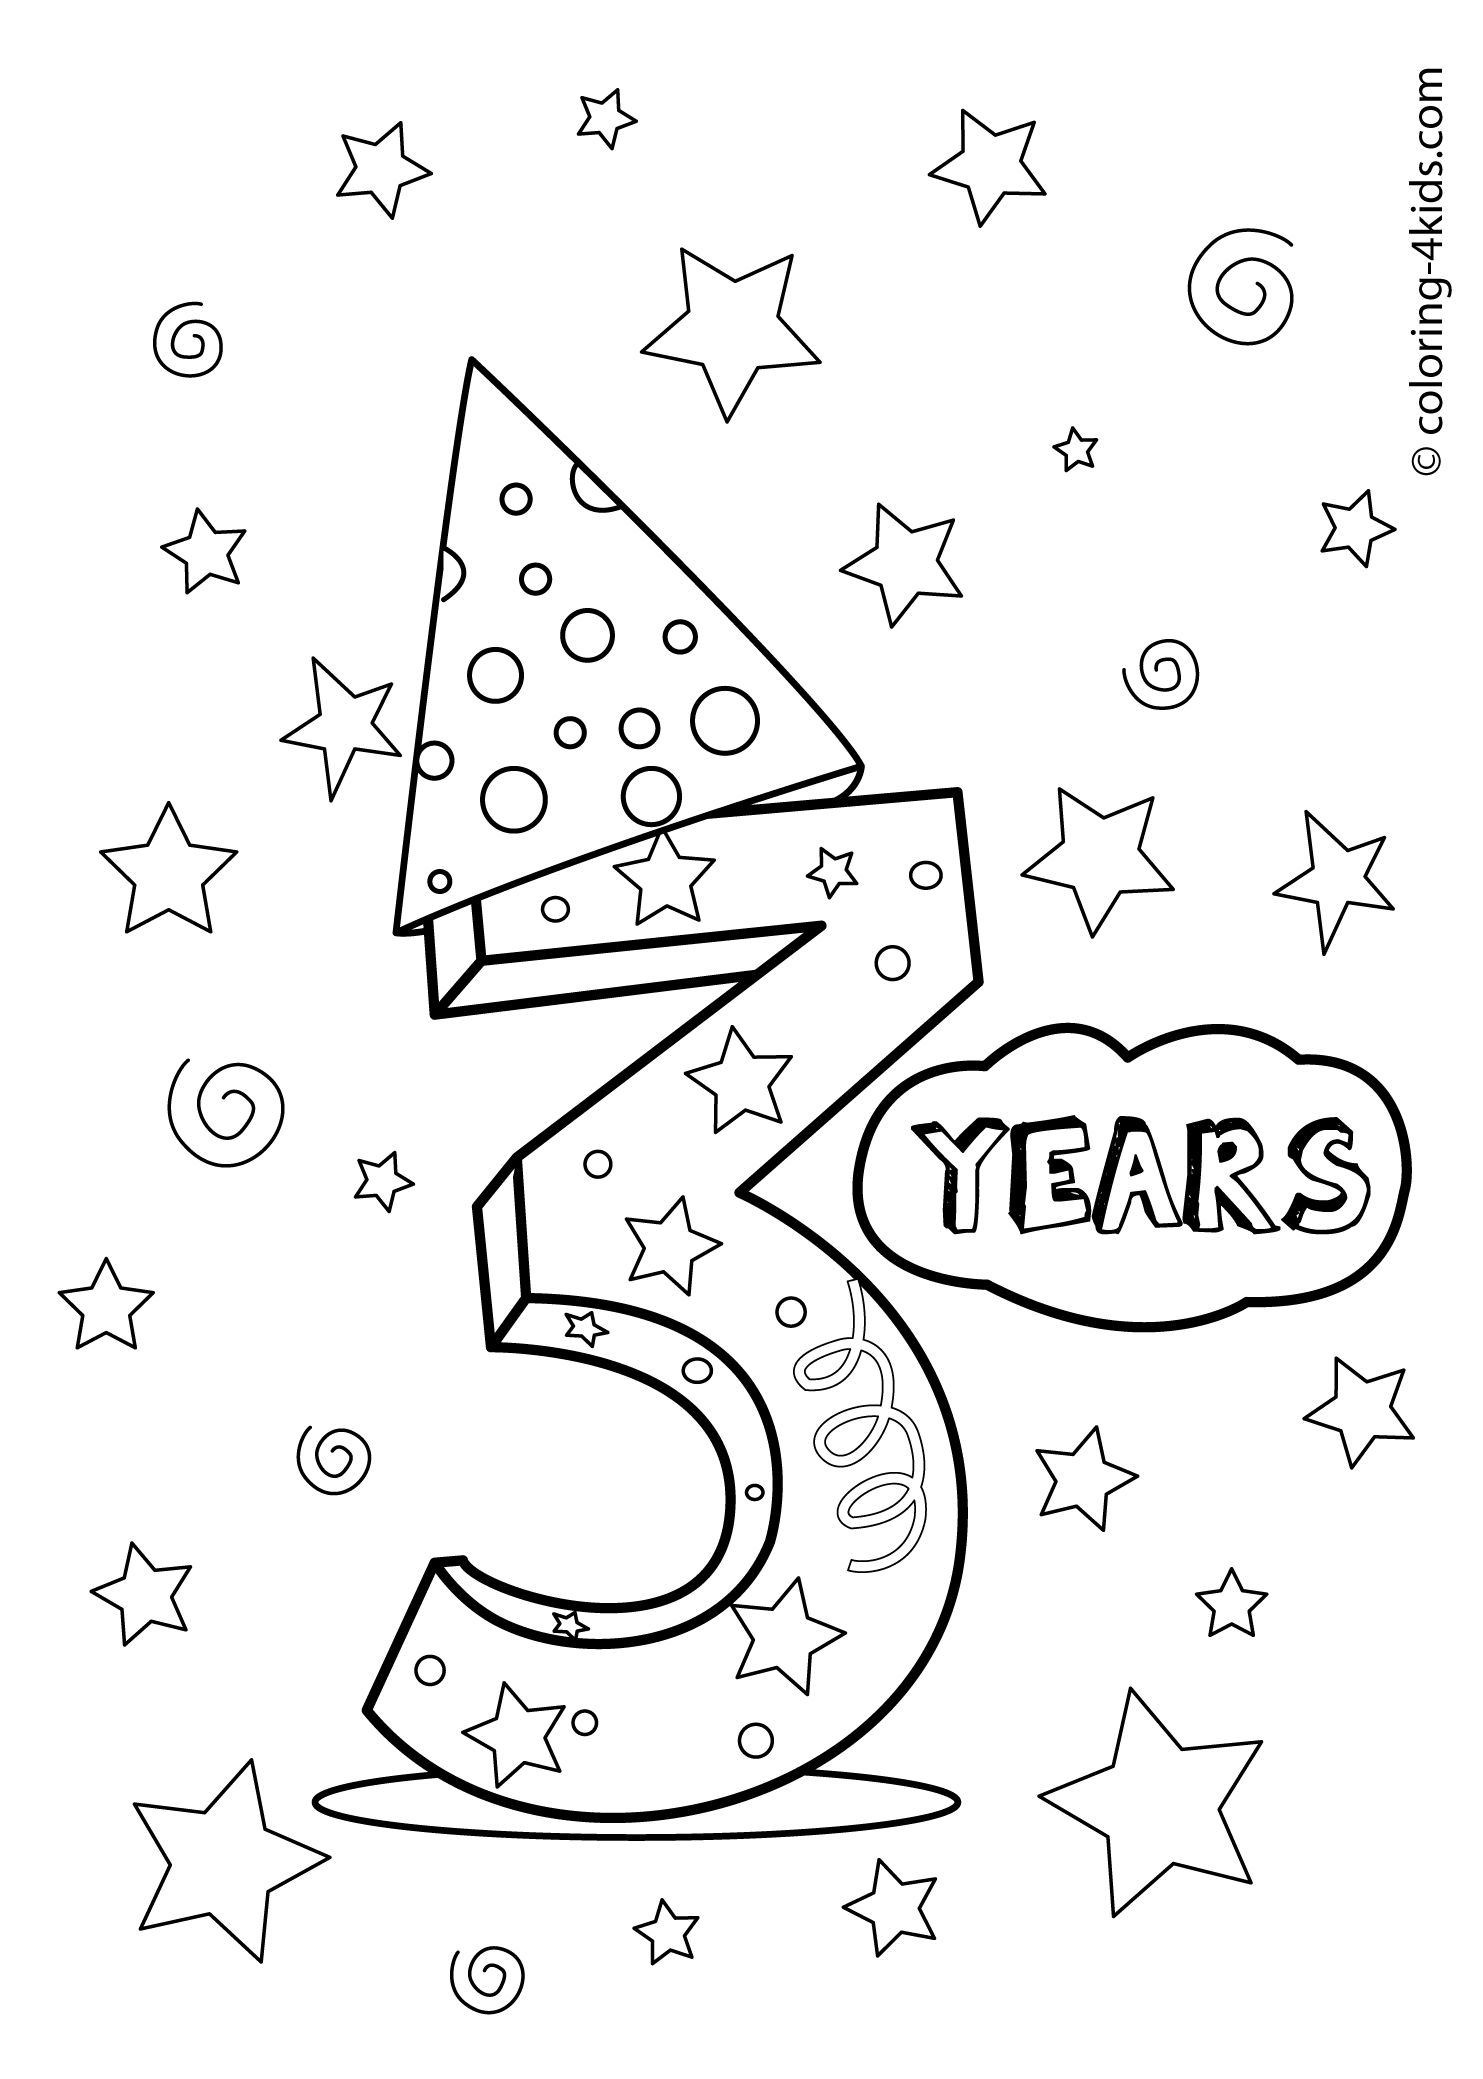 year 3 colouring worksheets birthday cake maths facts colouring page math facts worksheets colouring 3 year 